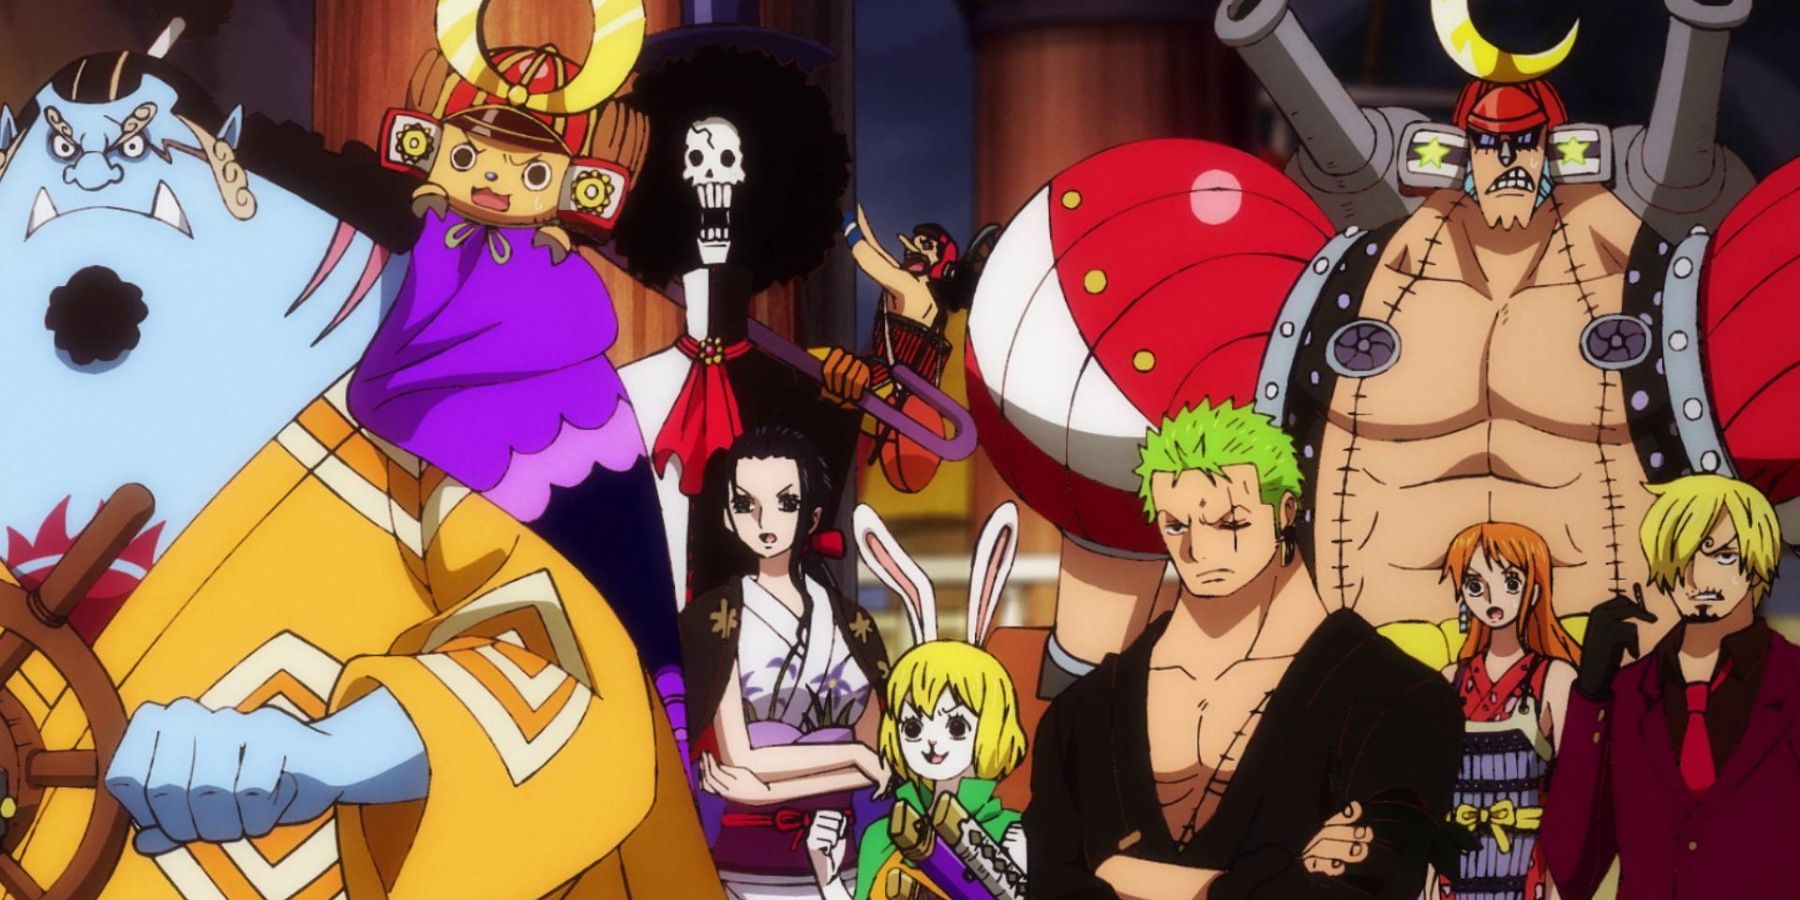 Characters and Groups - Chopper was going to be Luffy's third commander.